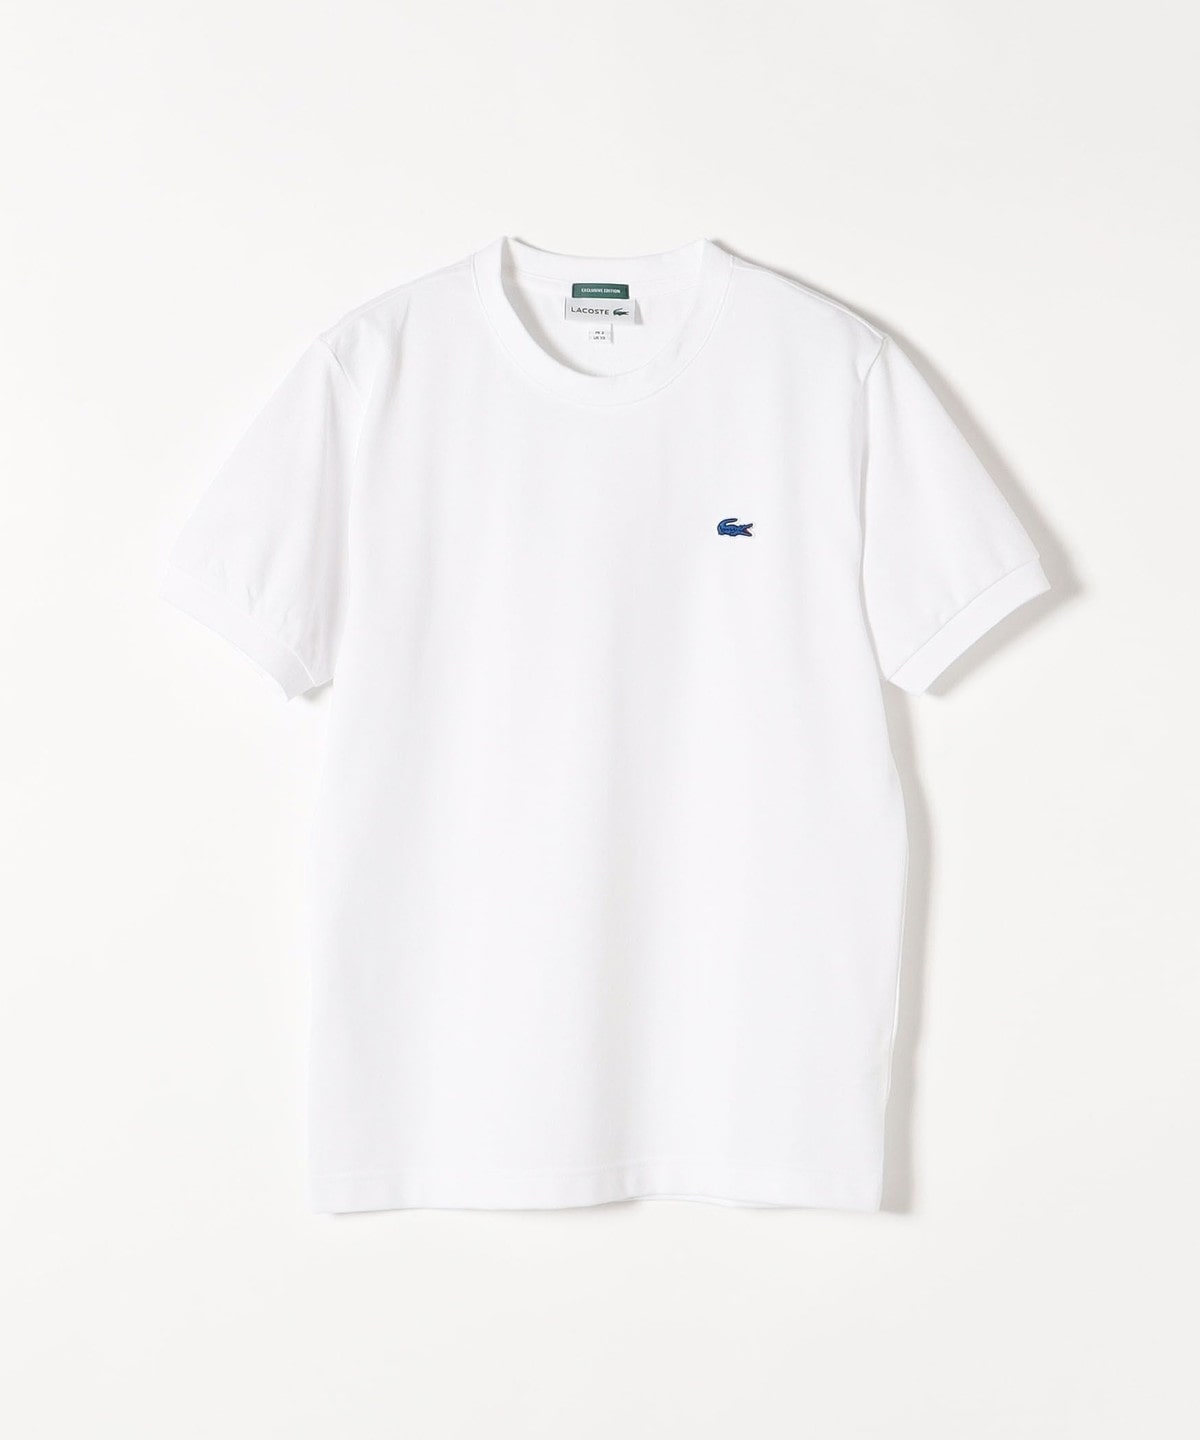 SHIPS any別注】LACOSTE: PIQUE クルーネック Tシャツ 23SS: Tシャツ 